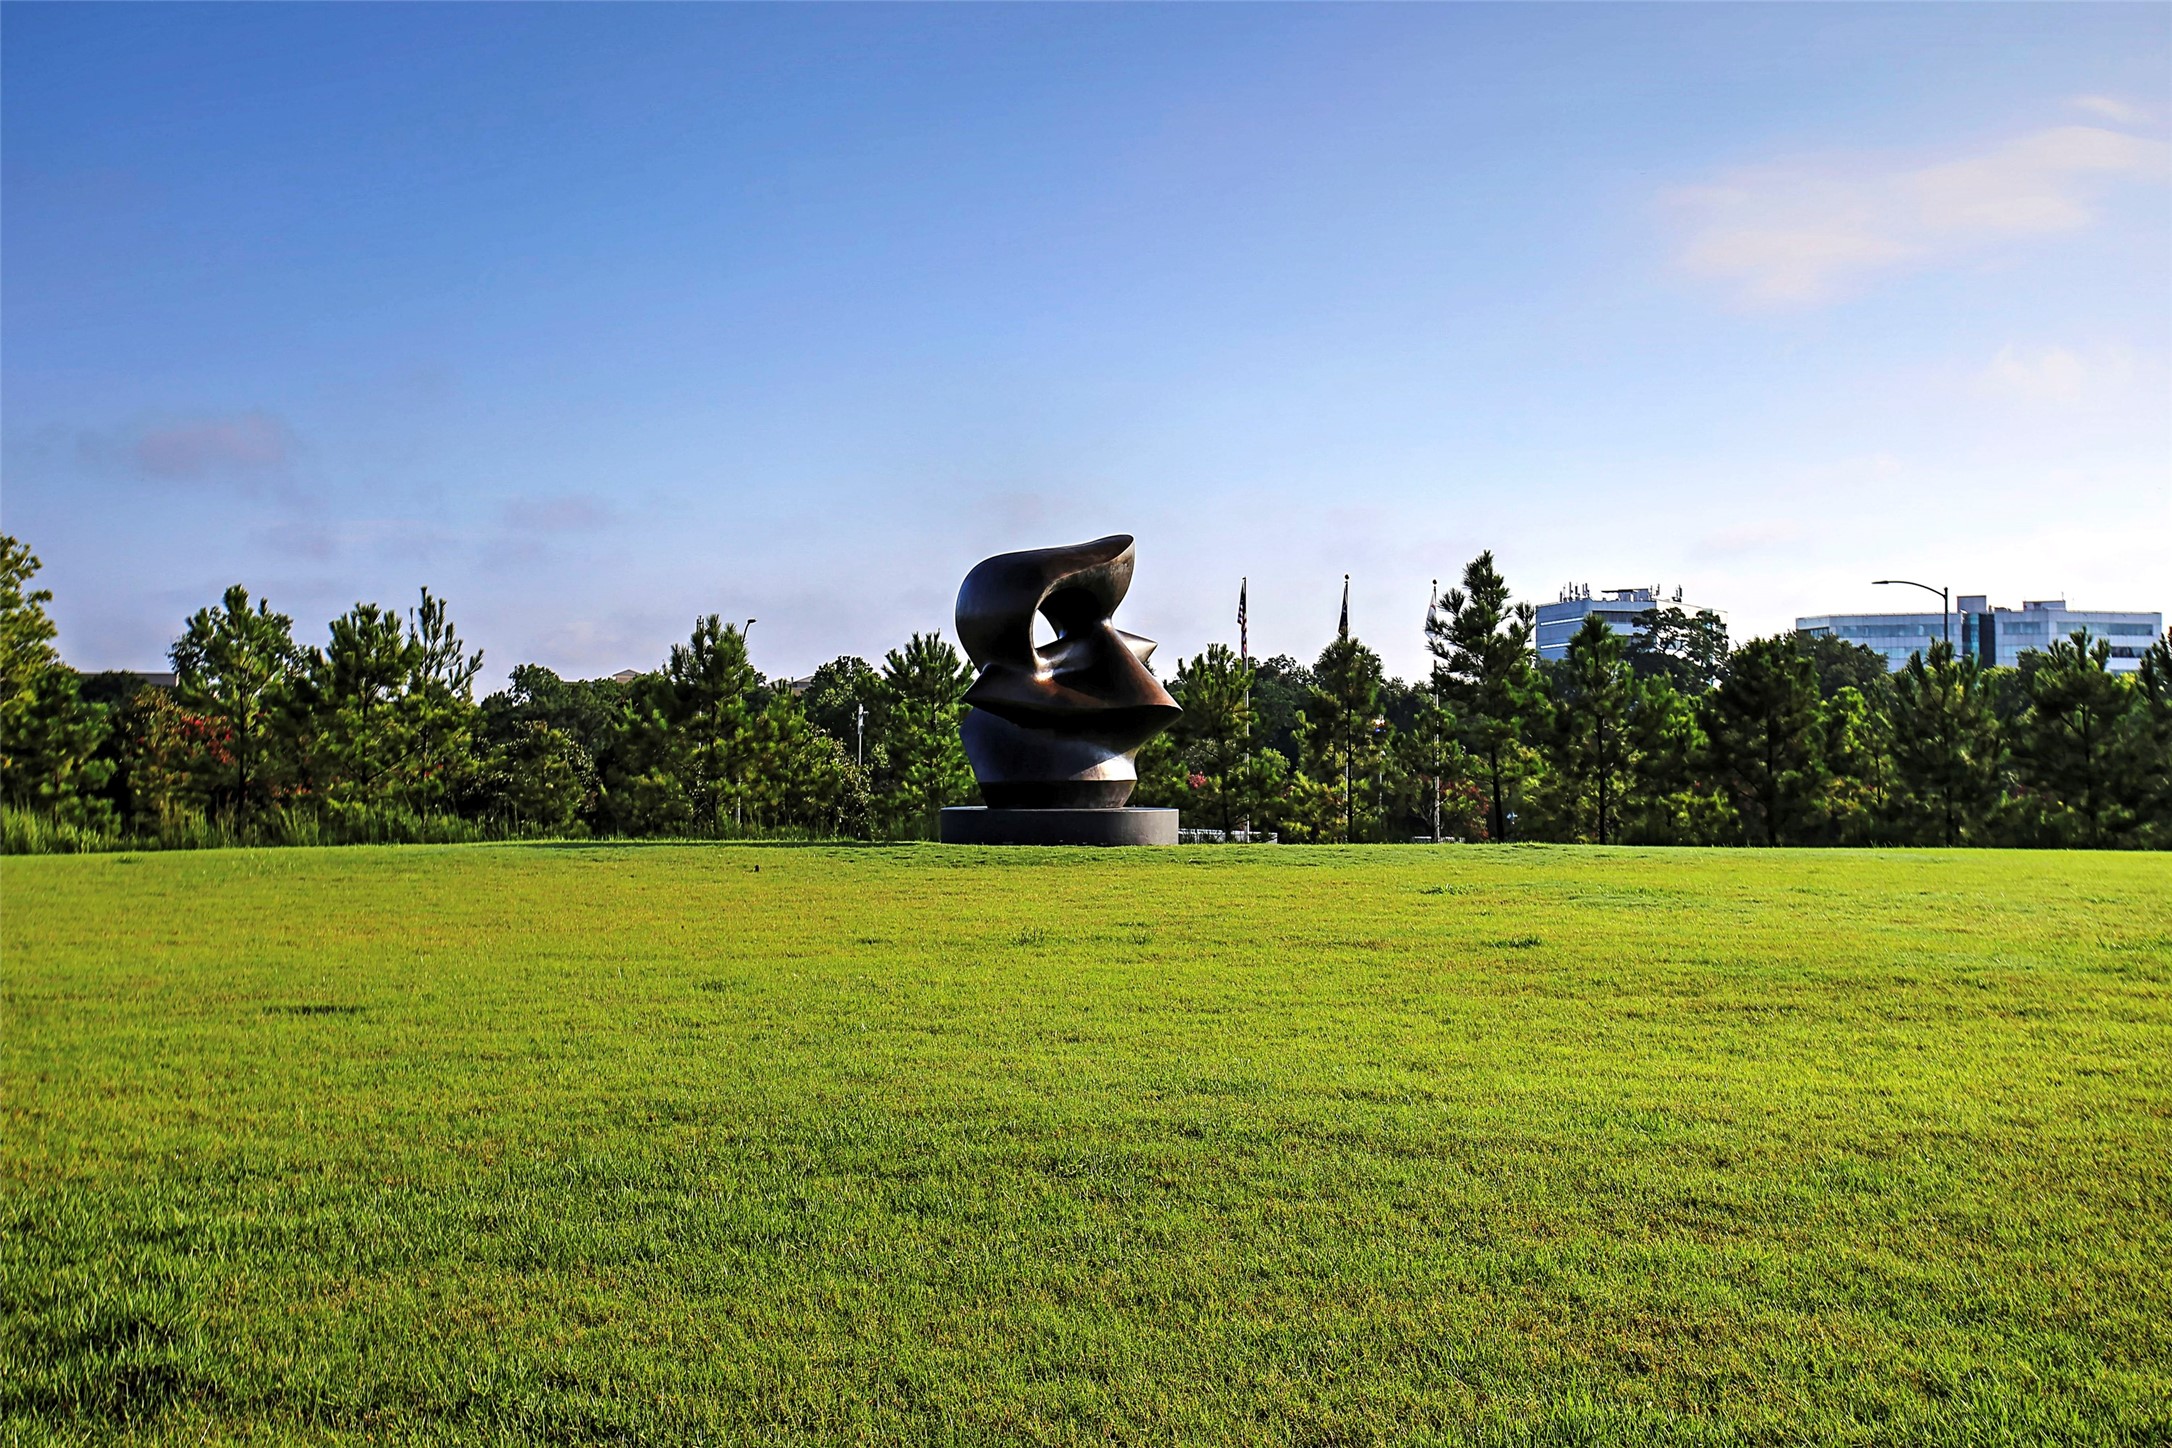 Contemporary art is found throughout the park.